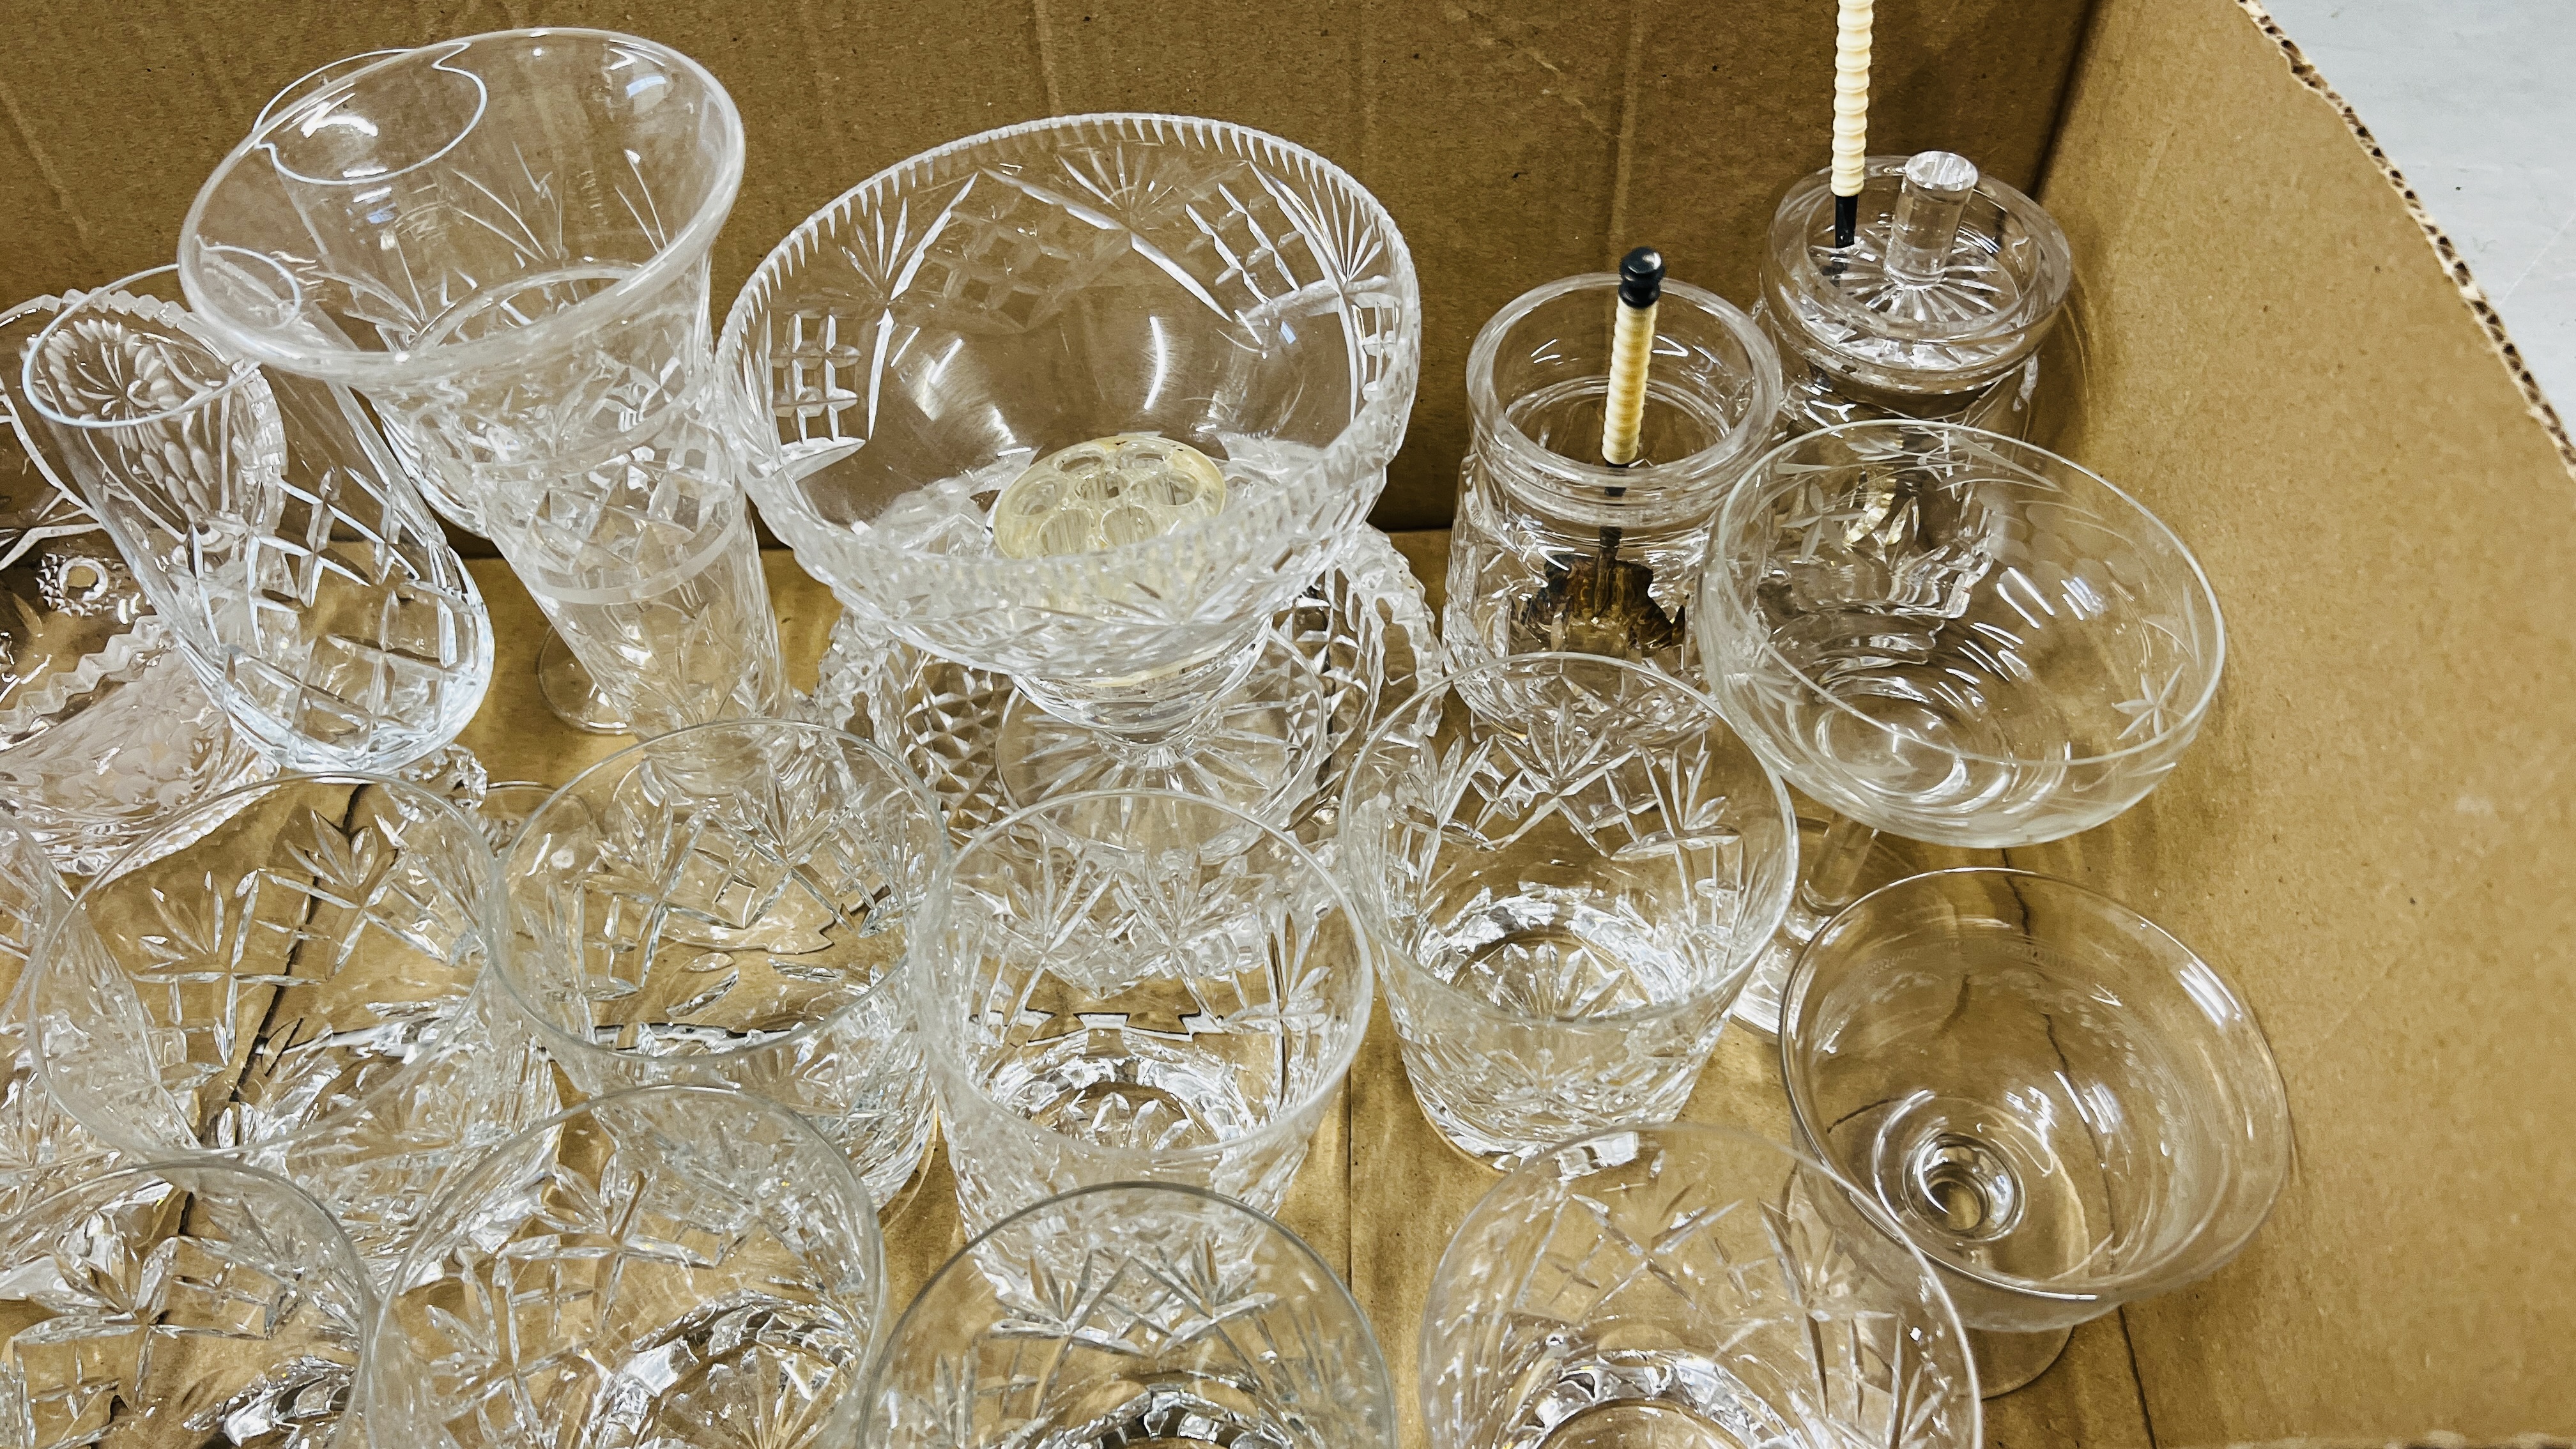 A QUANTITY GOOD QUALITY GLASSWARE INCLUDING MANY SETS, TUMBLERS, BRANDYS, FLUTES, SHERRY ETC. - Image 2 of 7